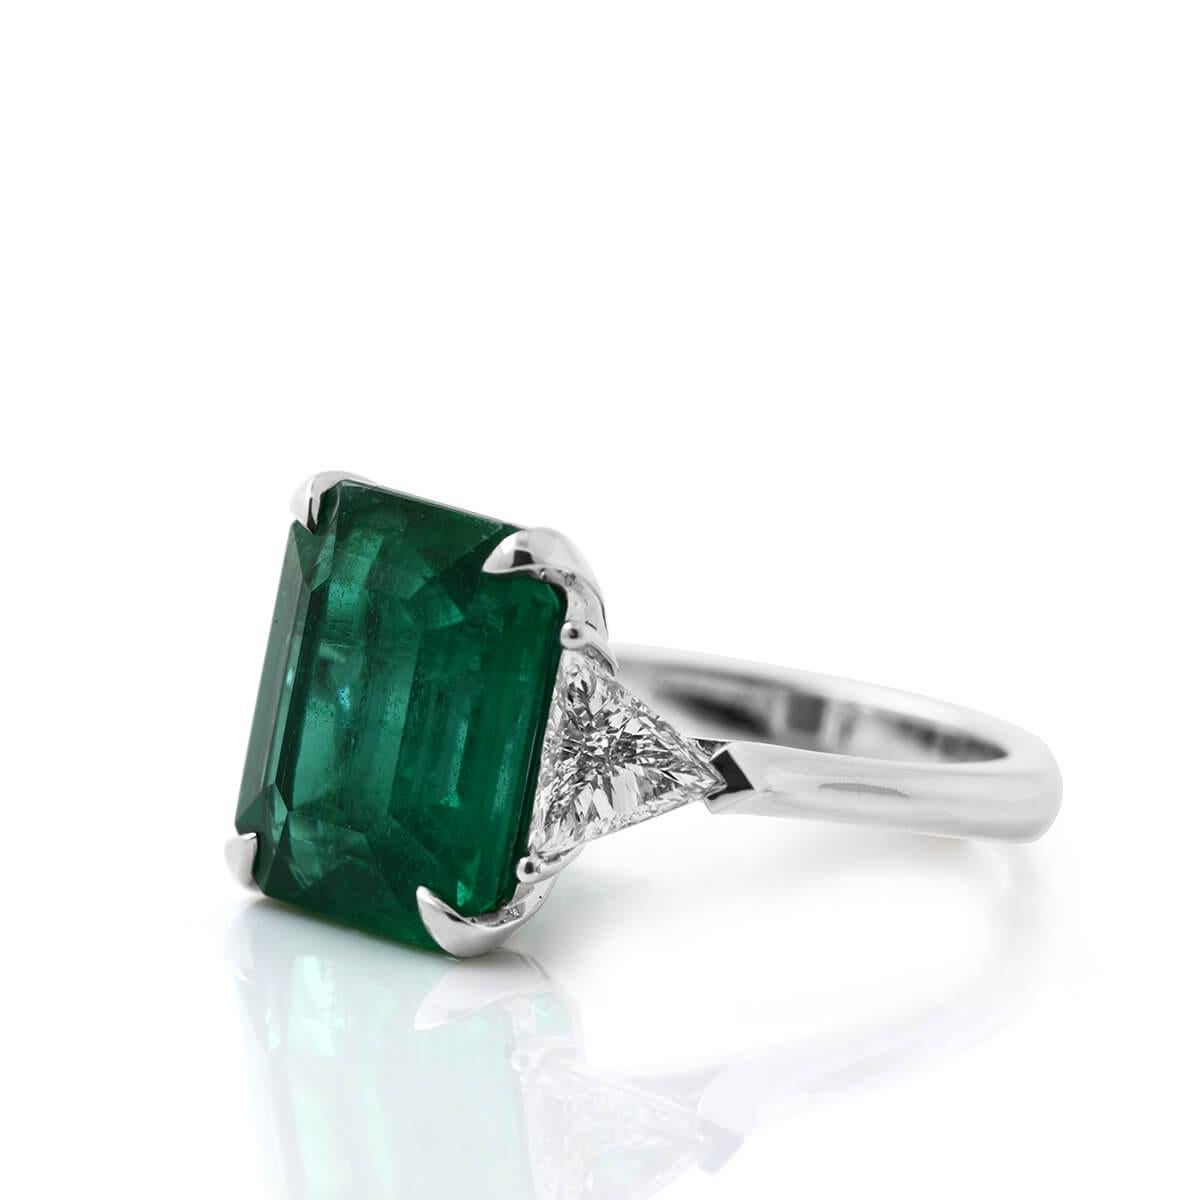 This contemporary piece hosts a natural unheated 6.34 Carat Natural Green Emerald and has natural white diamonds around the band, making up a total of 7.29 Carats. 
According to ancient myths, emeralds were thought to guard against memory loss and